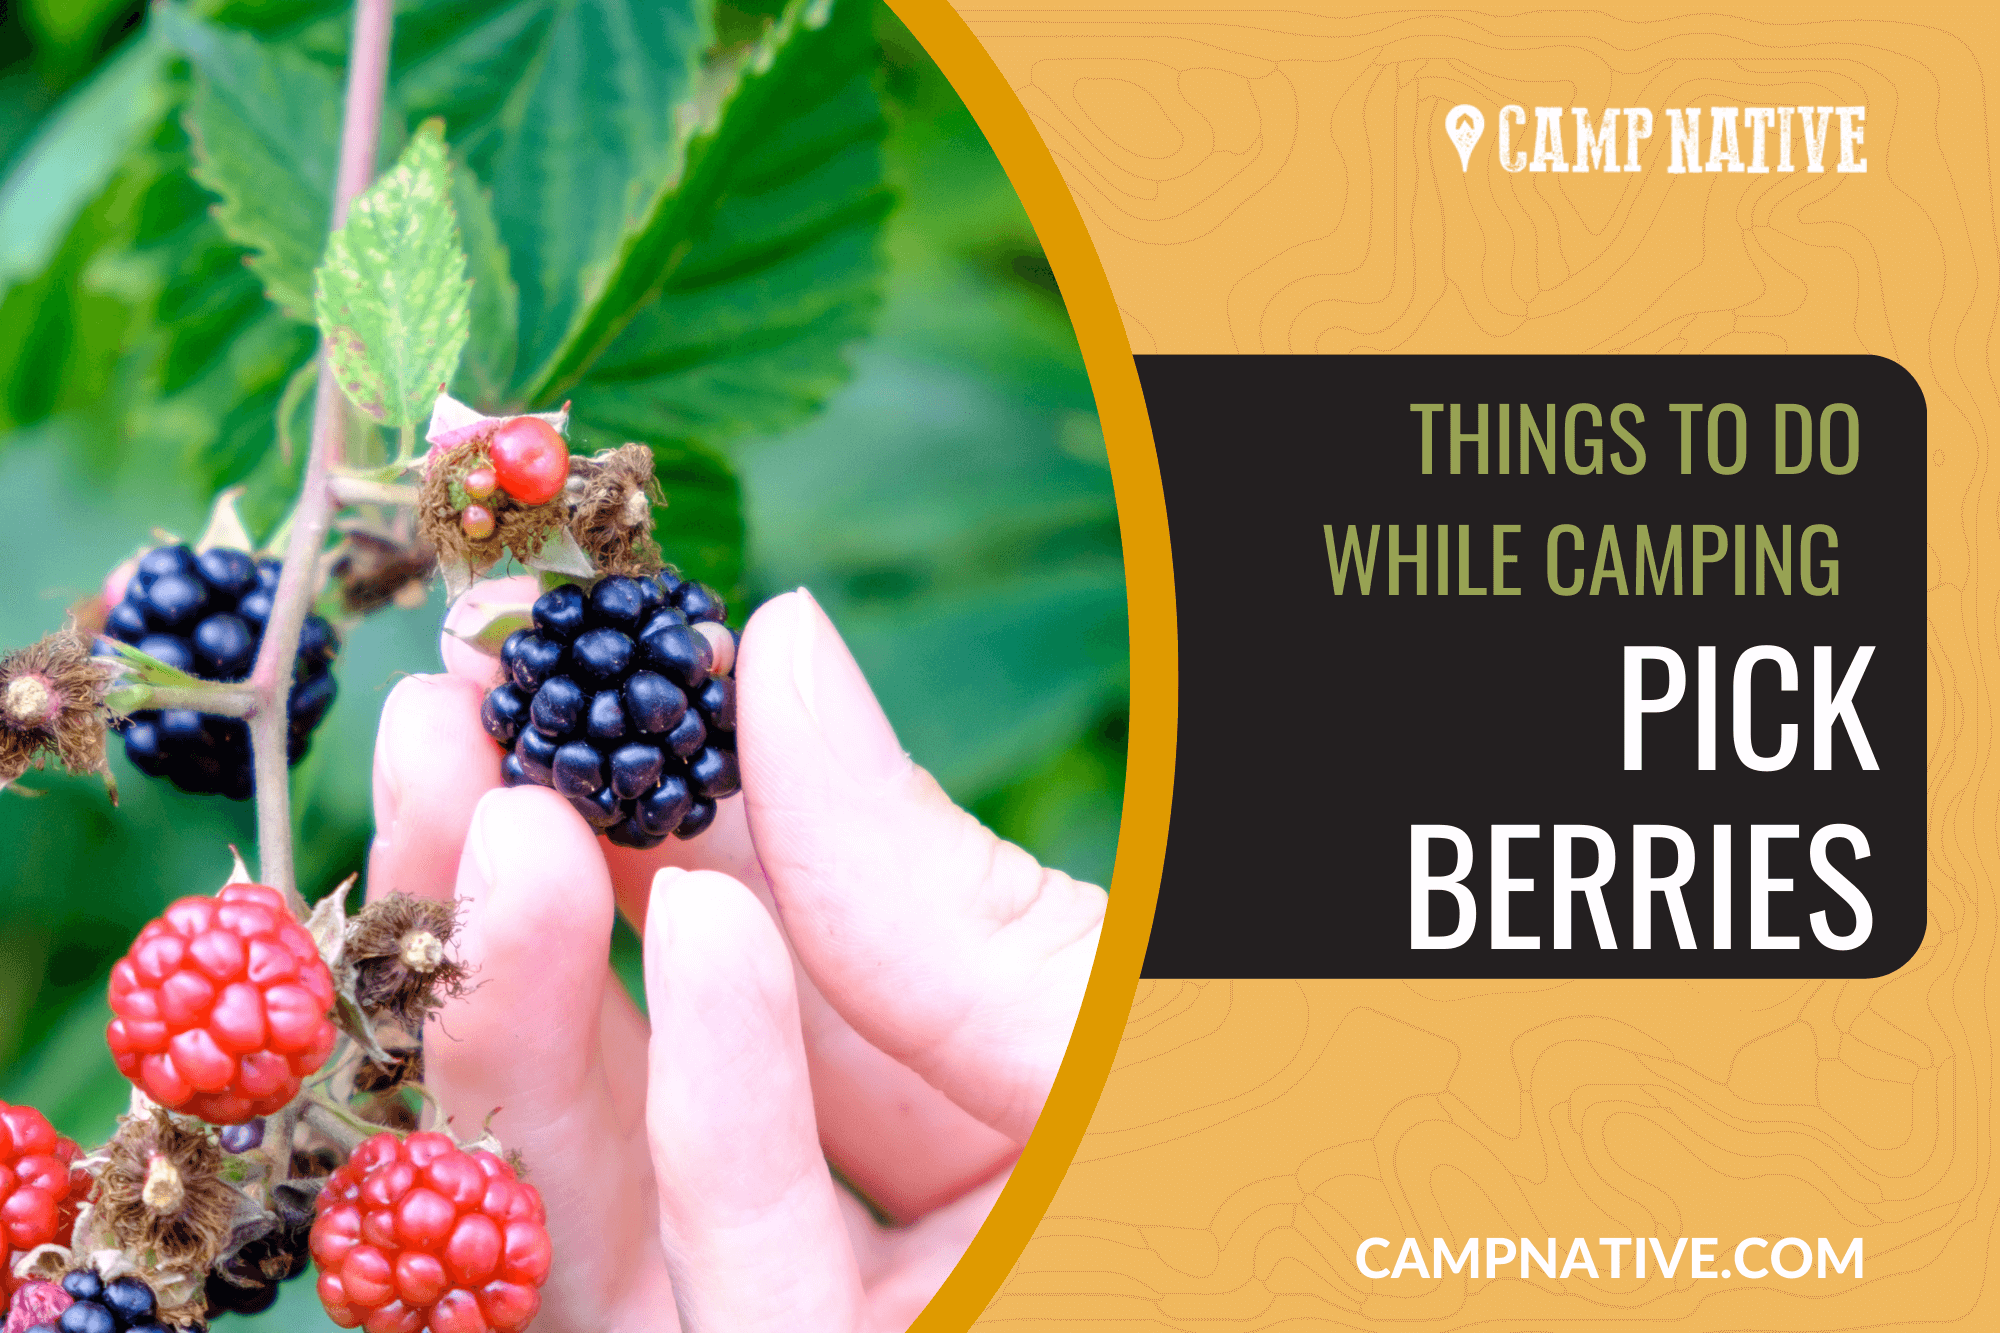 THINGS TO DO WHILE CAMPING PICK BERRIES